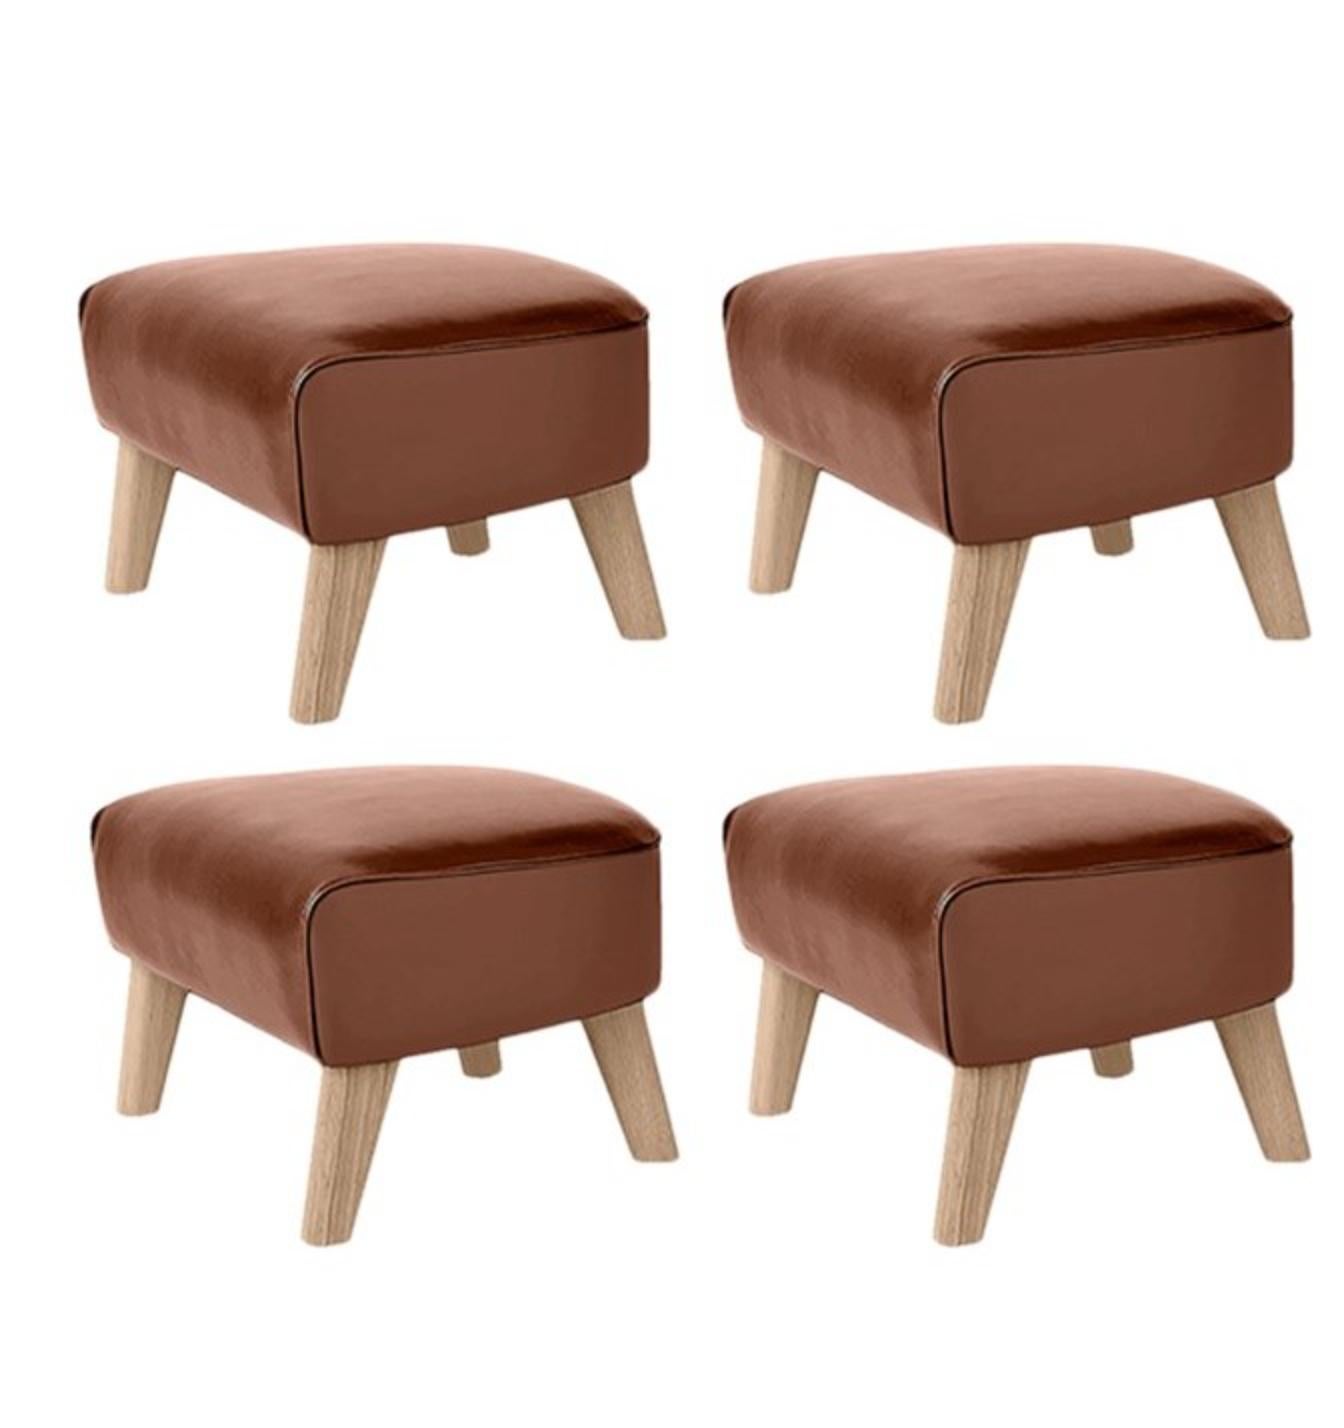 Set of 4 brown leather and natural oak my own chair footstools by Lassen
Dimensions: W 56 x D 58 x H 40 cm 
Materials: Leather, oak

The My Own Chair Footstool has been designed in the same spirit as Flemming Lassen’s original iconic chair,